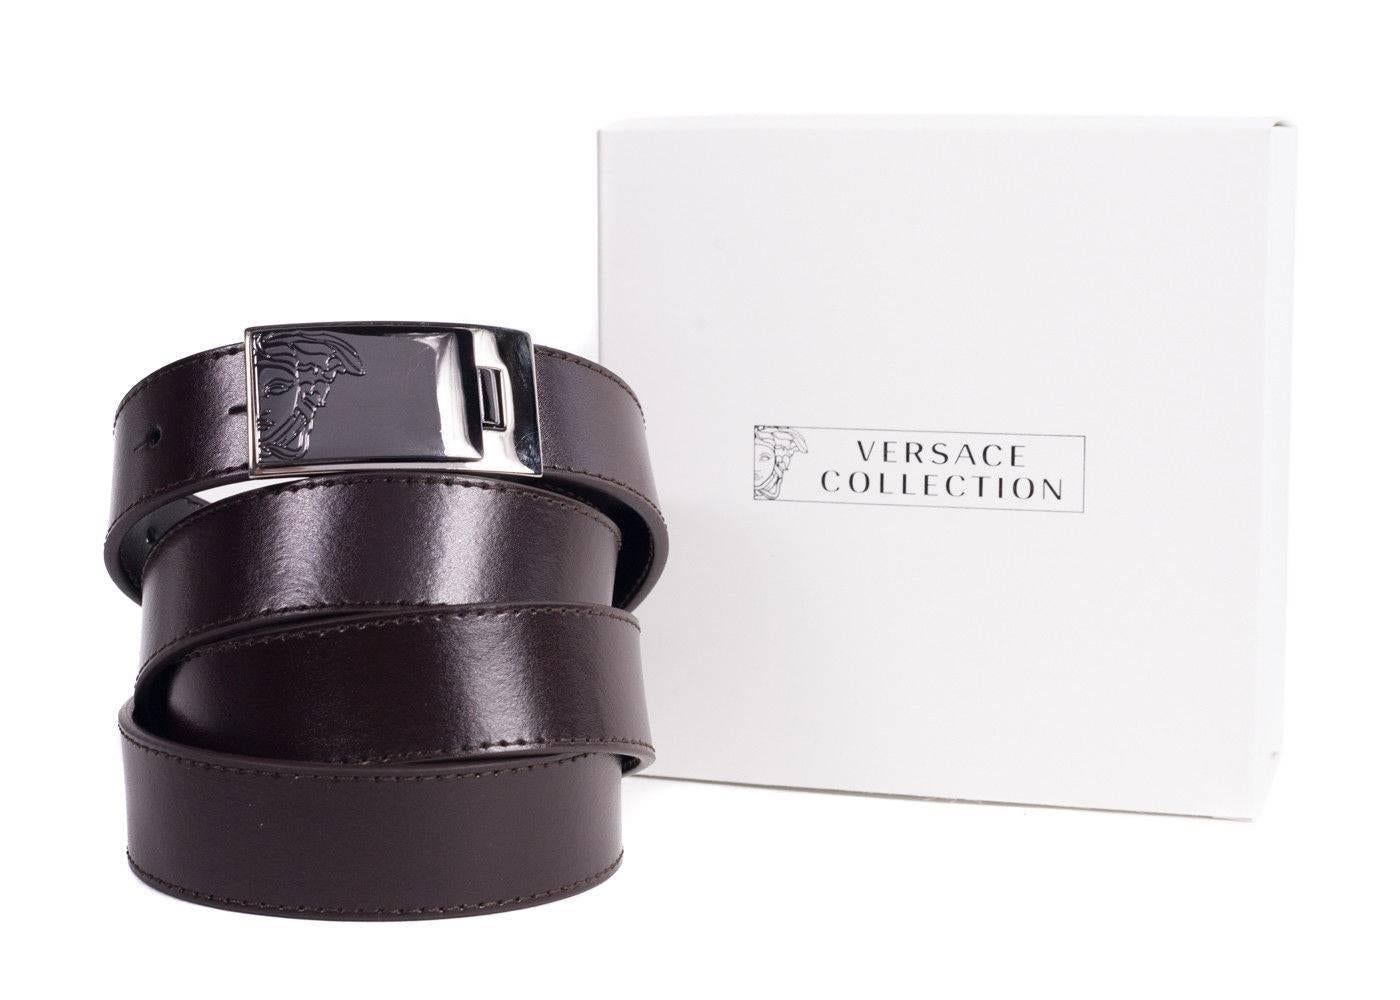 Brand New Versace Collection Belt
Original Tags
Retails in Stores & Online for $450
One Size Fits All


Versace Collection's brown leather belt made with 100% calfskin leather featuring a silver plated logo with a medusa head. Perfect to pair with